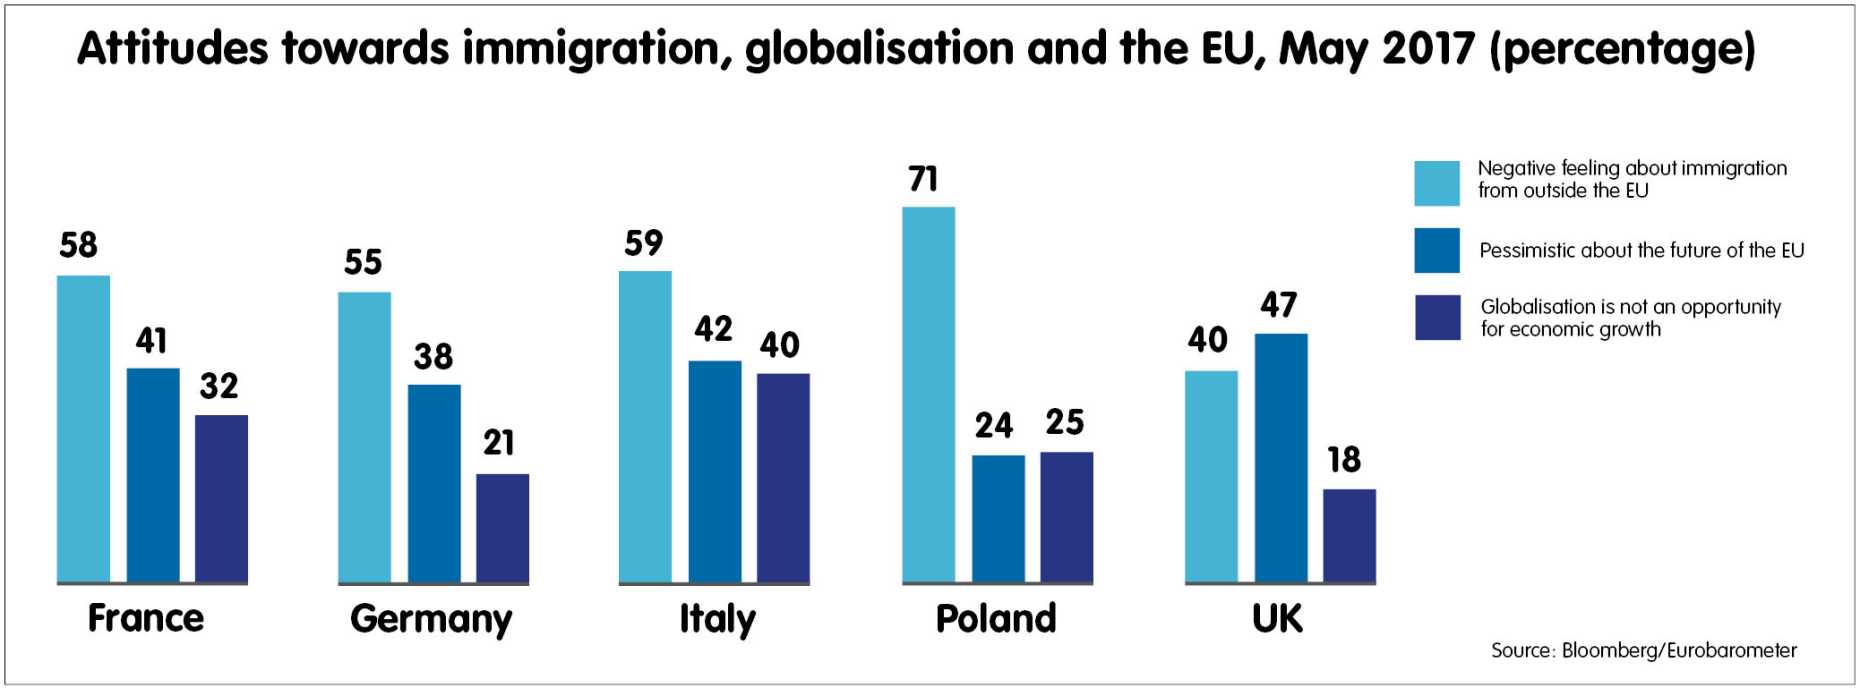 Attitudes towards immigration, globalisation and the EU